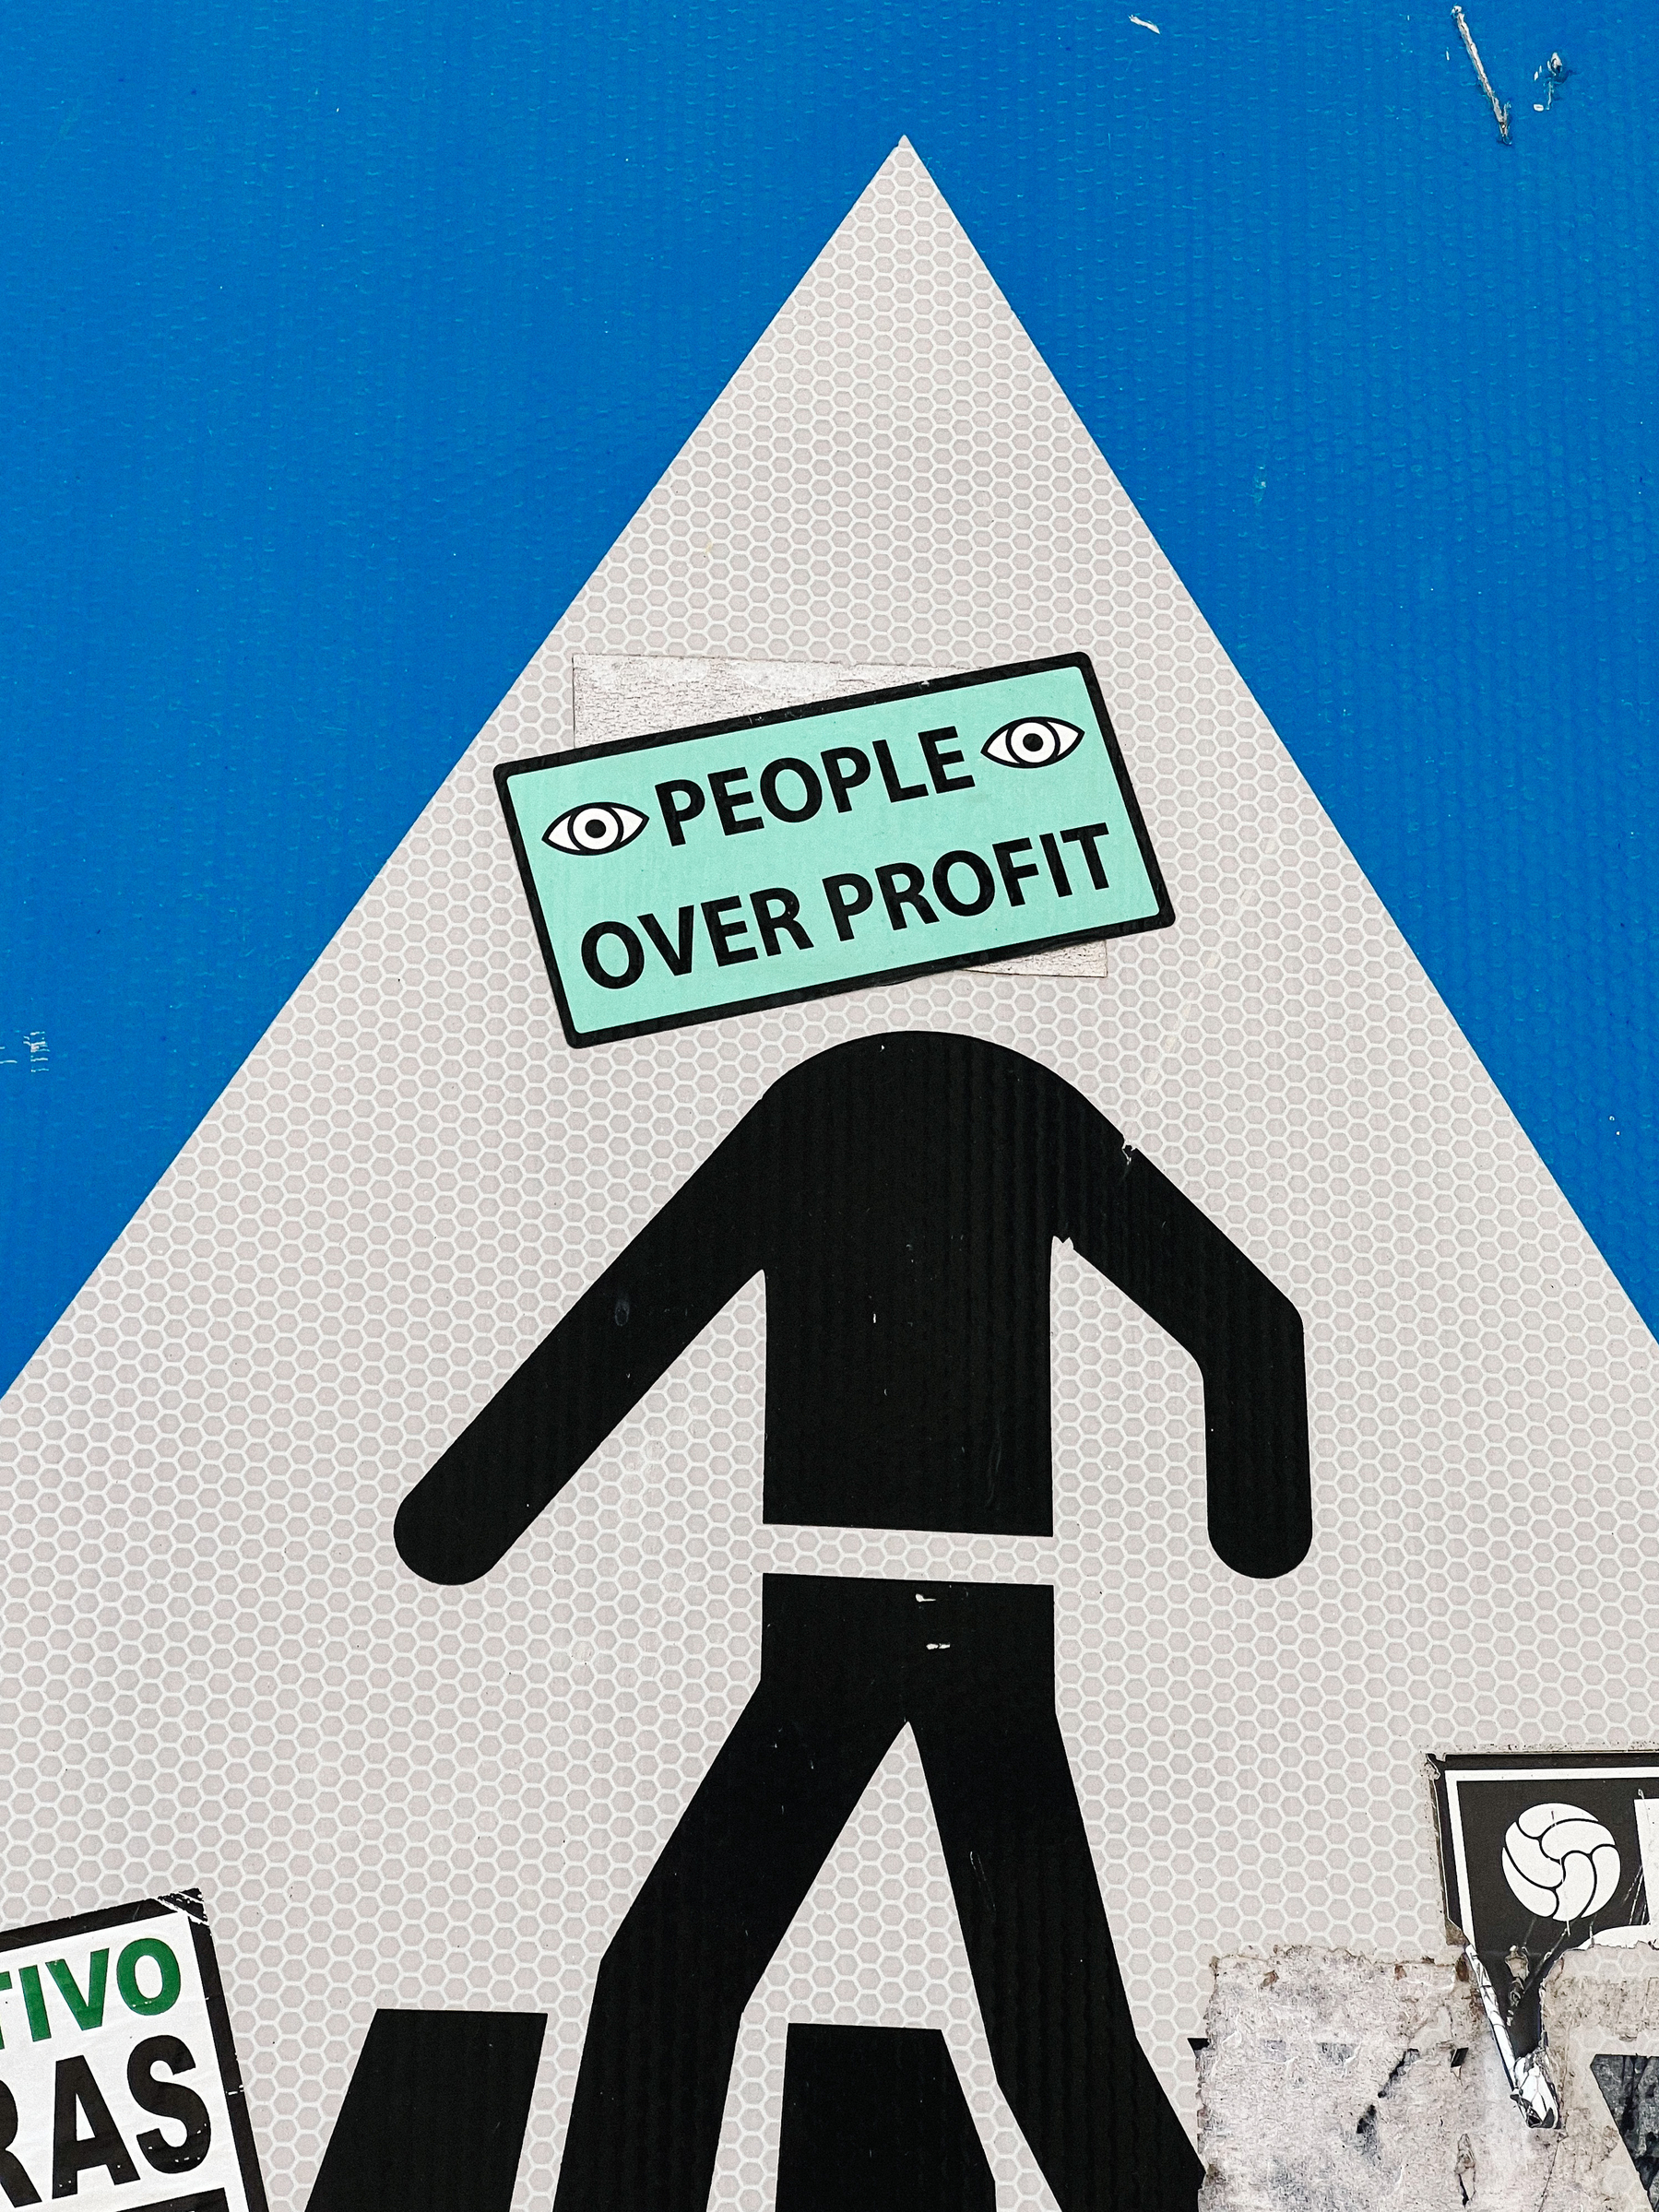 A crosswalk street sign where the head of the person crossing the street has been replaced with a sticker that says “people over profit”. 